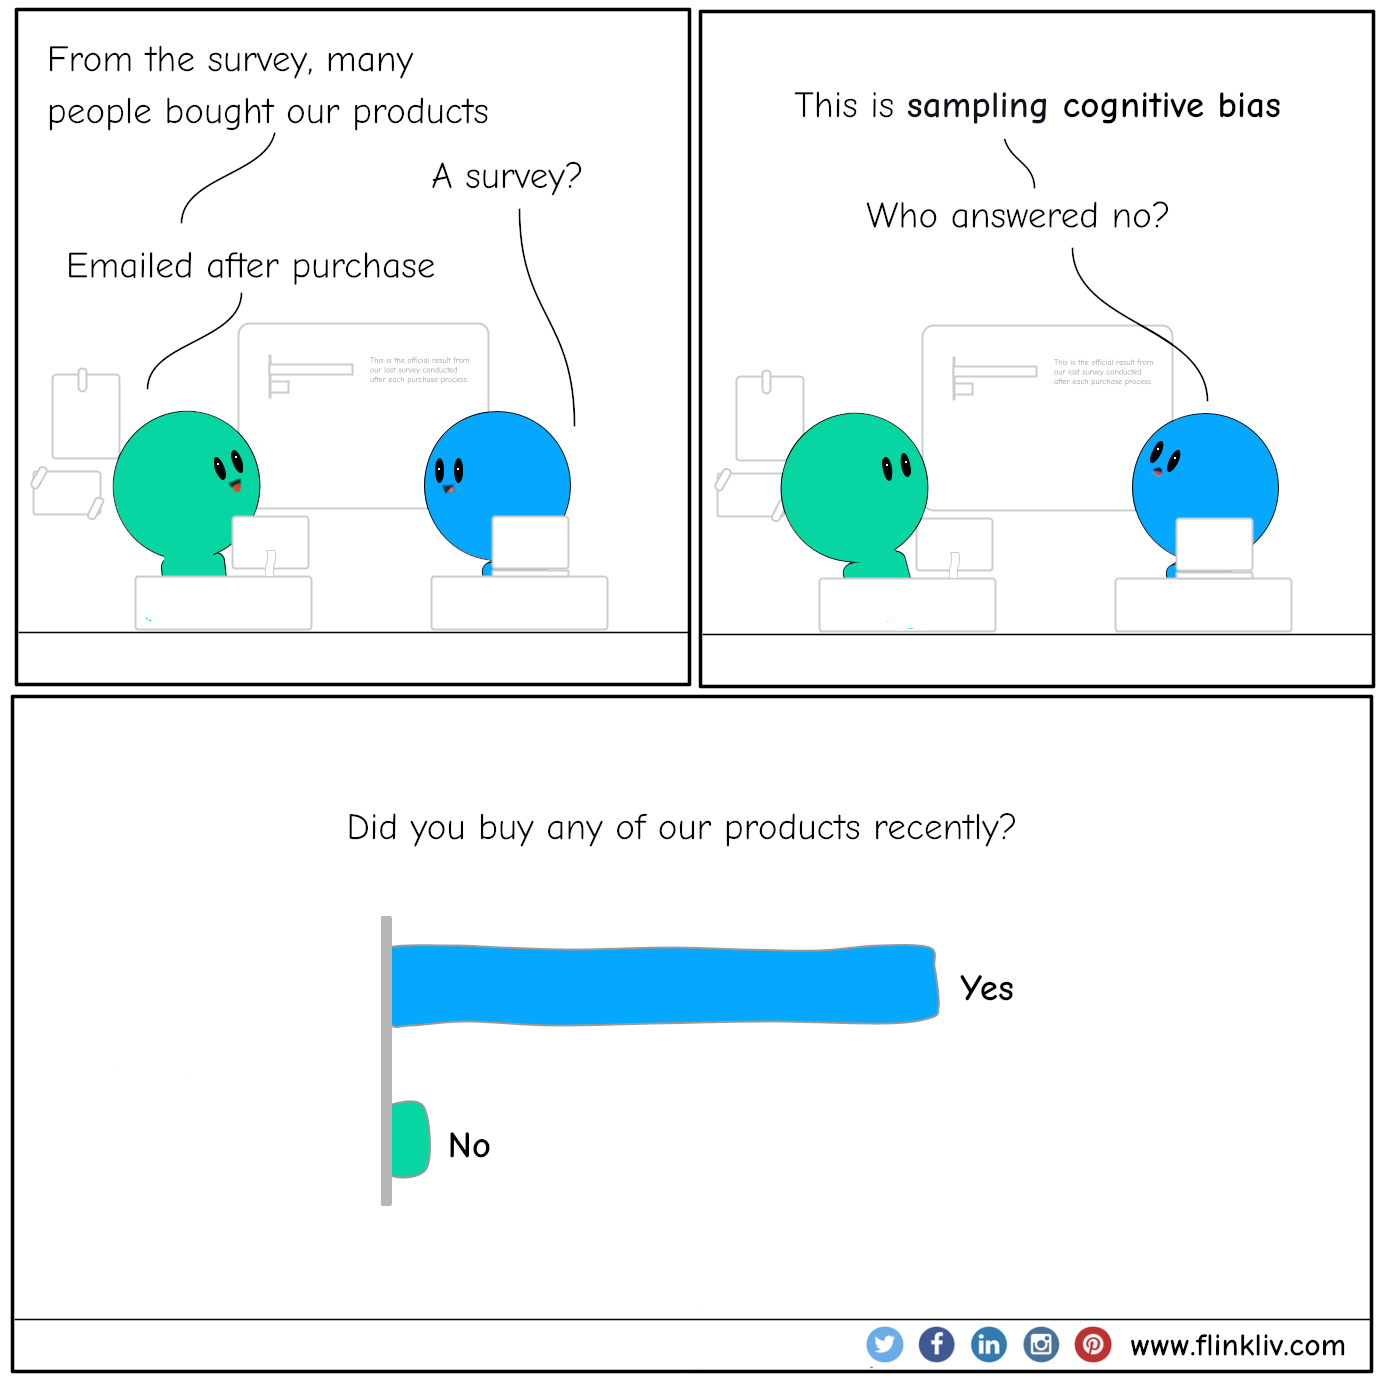 Conversation between A and B about sampling cognitive bias. A:From the survey, many people bought our products. B: A survey? A: Emailed after purchase B: This is sample cognitive bias. B: Who answered no?.
				By Flinkliv.com